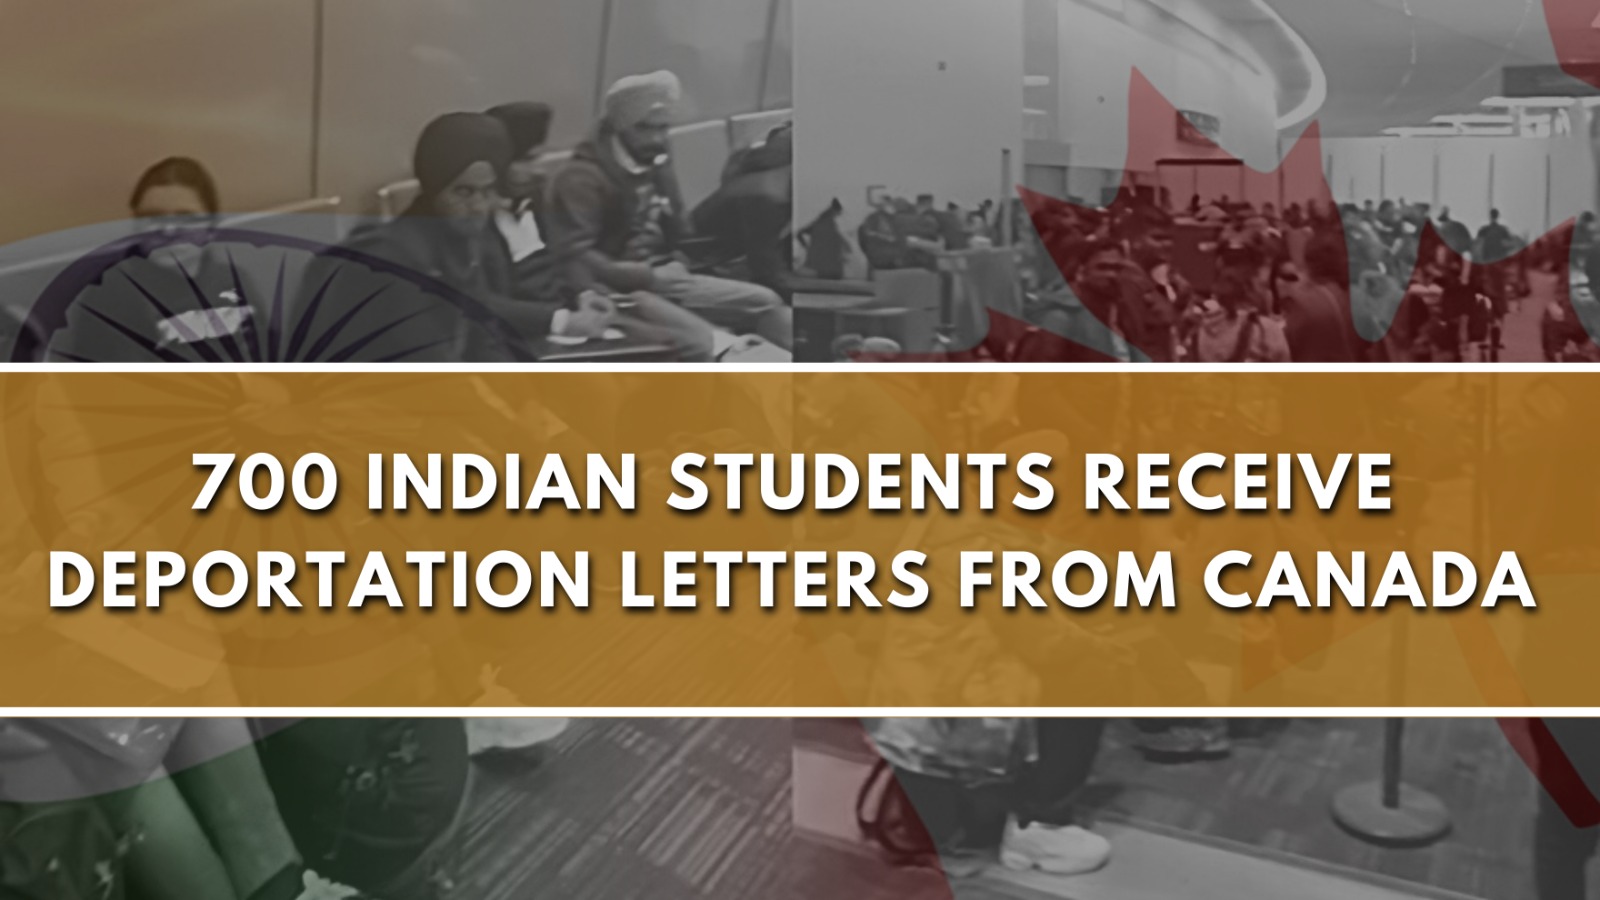 700 Indian Students Receive Deportation Letters From Canada